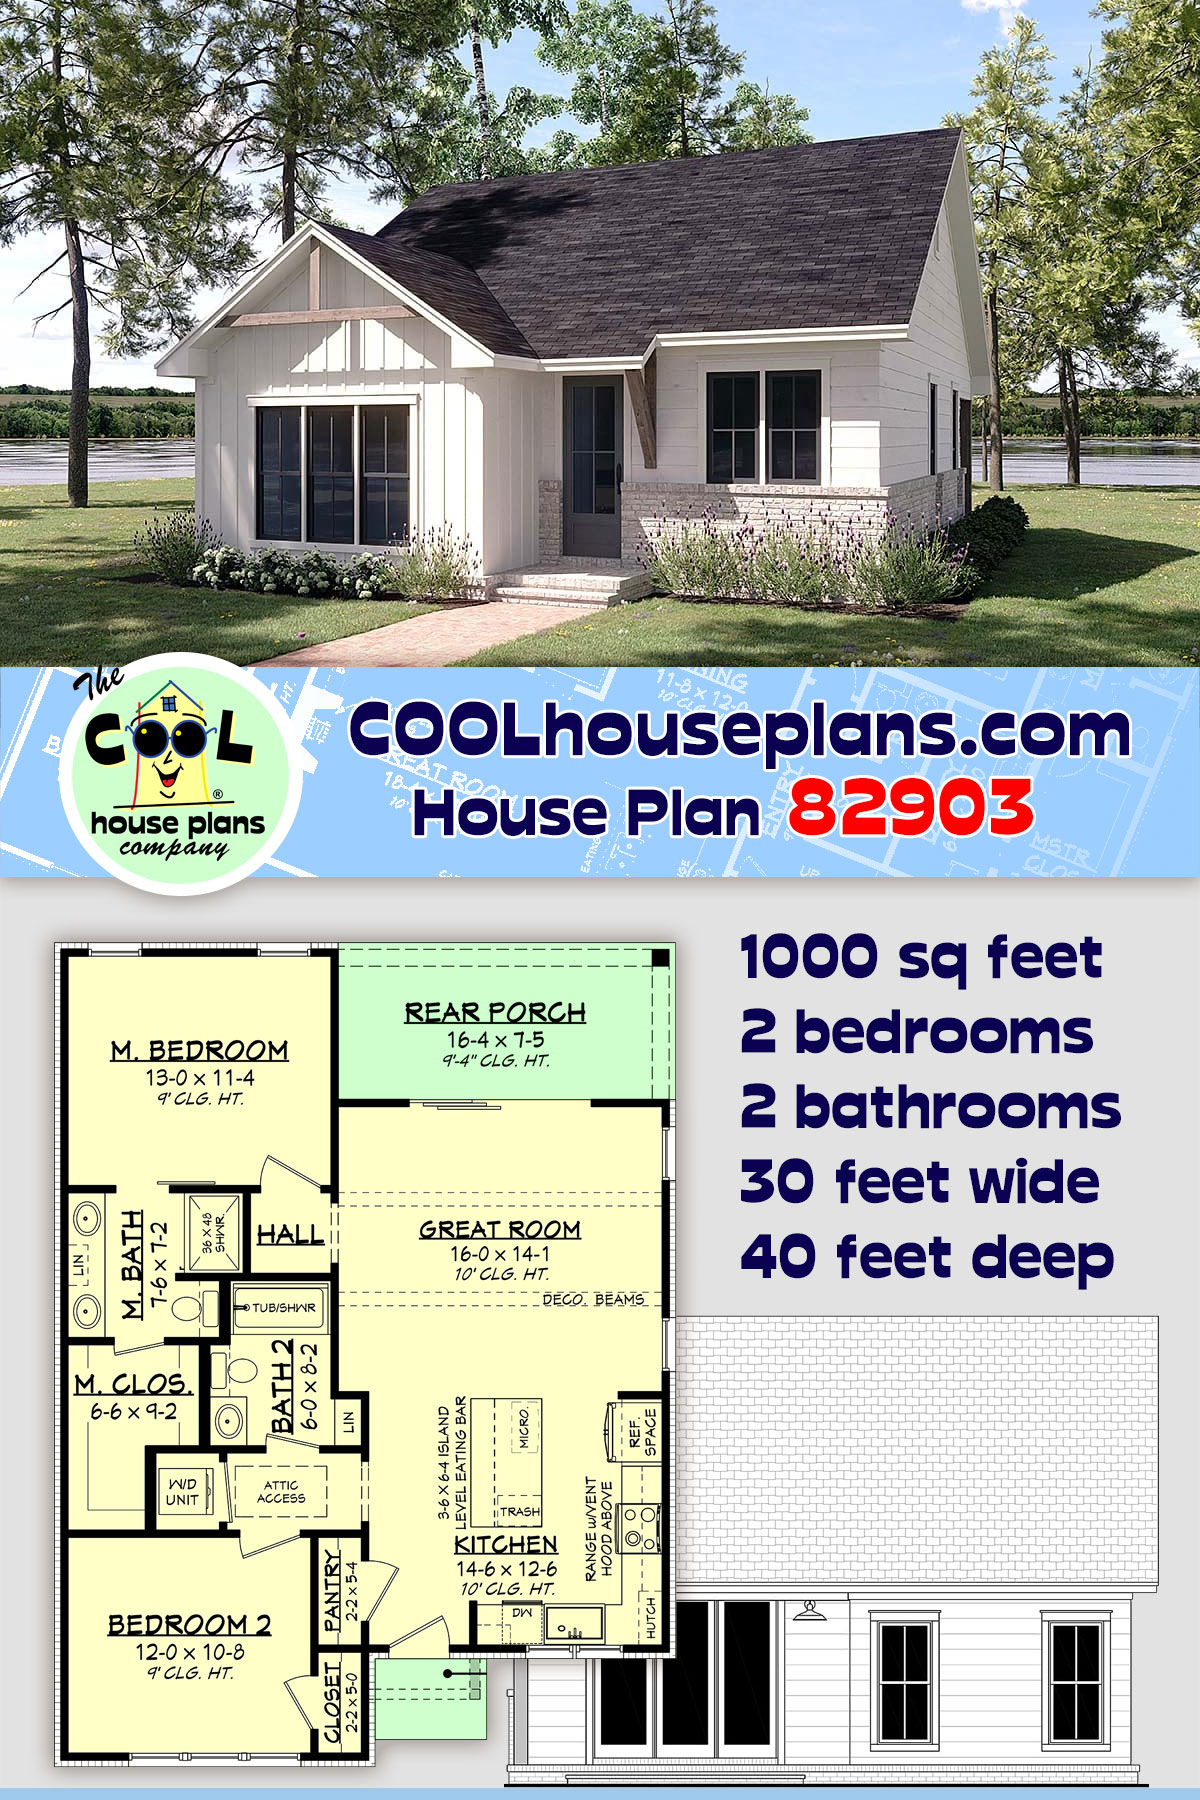 Cottage, Country, Farmhouse, Traditional House Plan 82903 with 2 Beds, 2 Baths